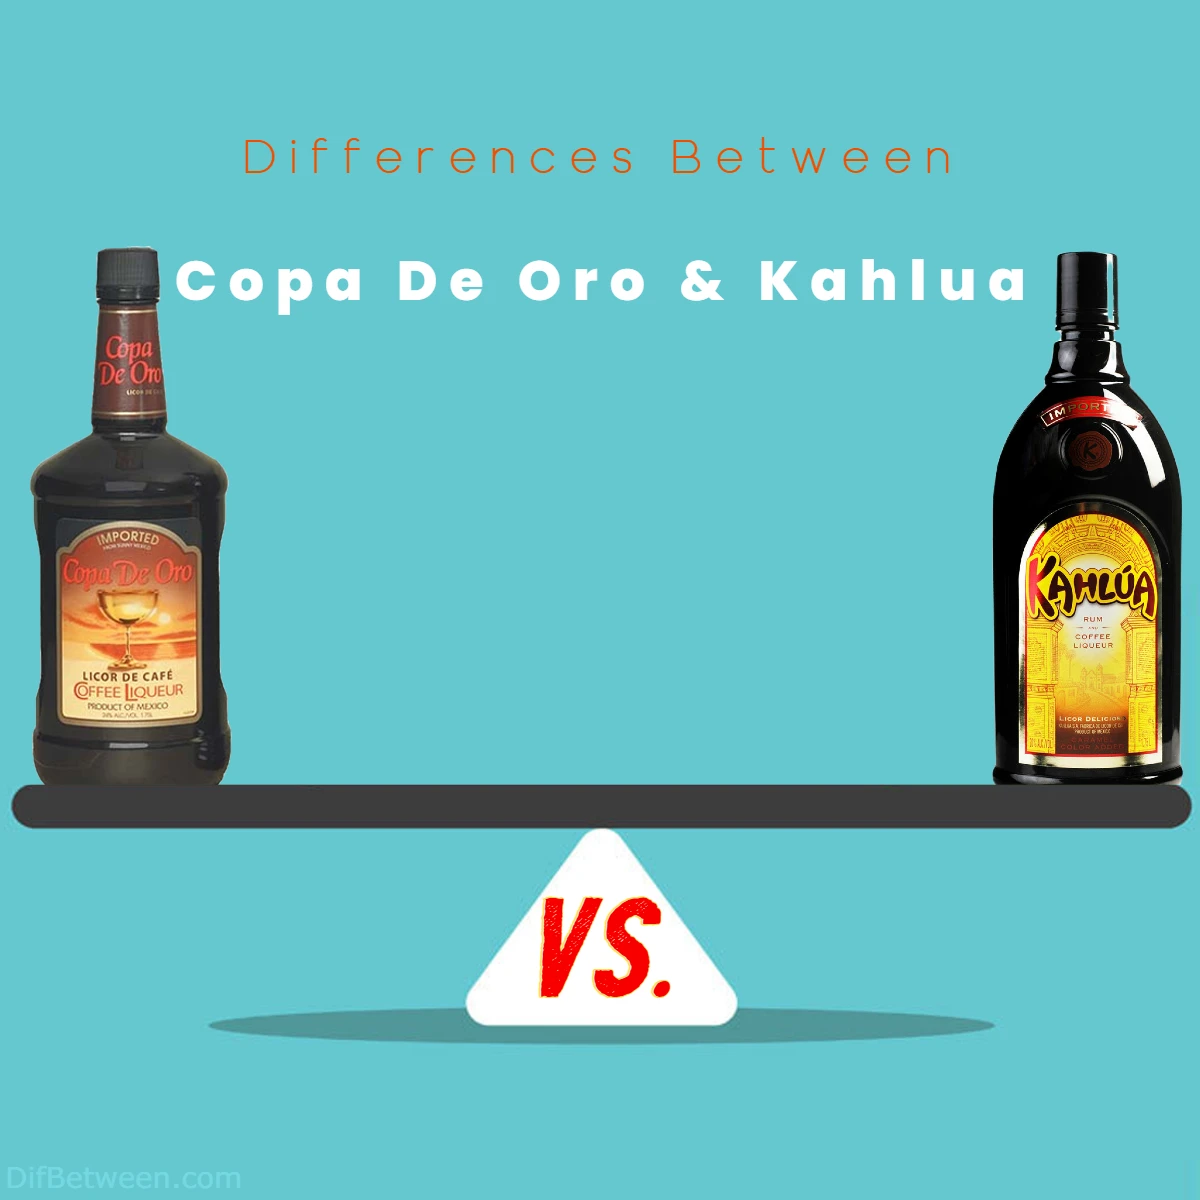 Differences Between Kahlua and Copa De Oro